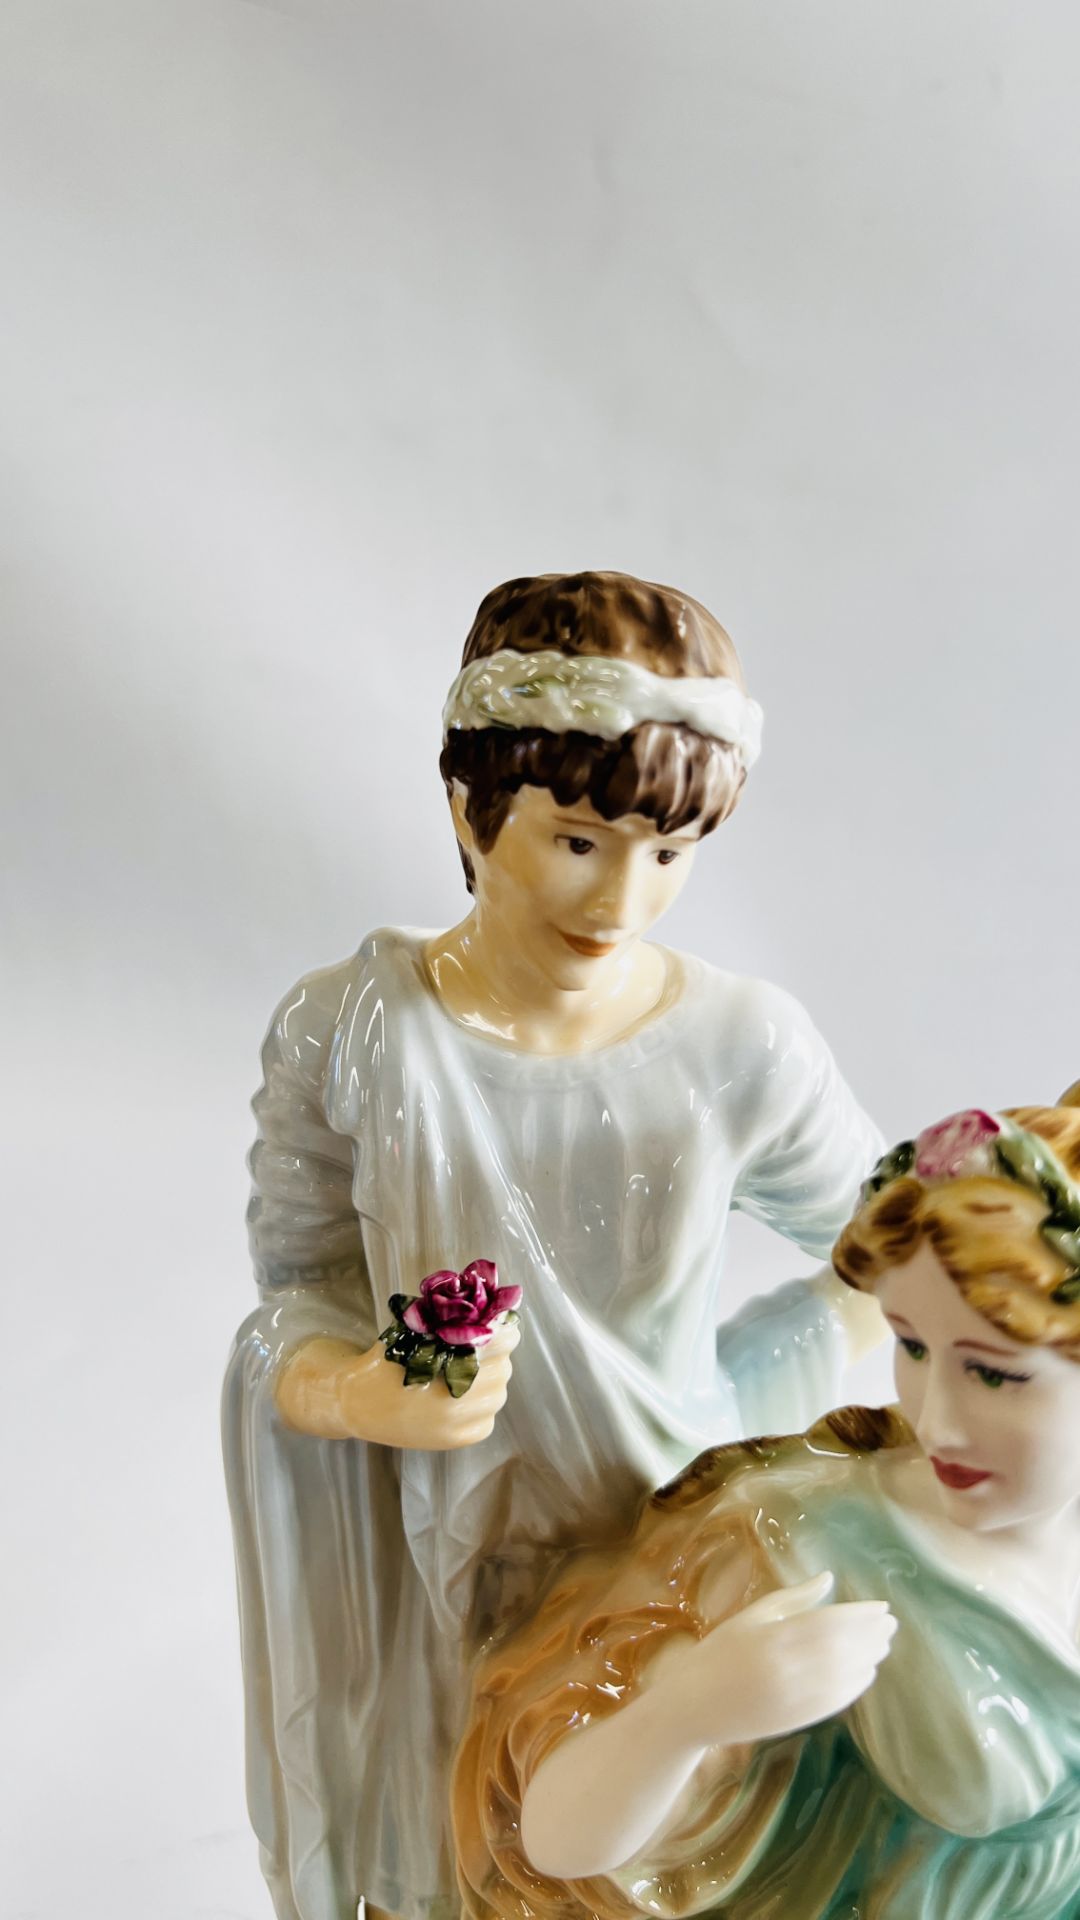 A WEDGWOOD LIMITED EDITION 920/3000 FIGURINE THE CLASSICAL COLLECTION "ADORATION" BOXED WITH - Image 2 of 7